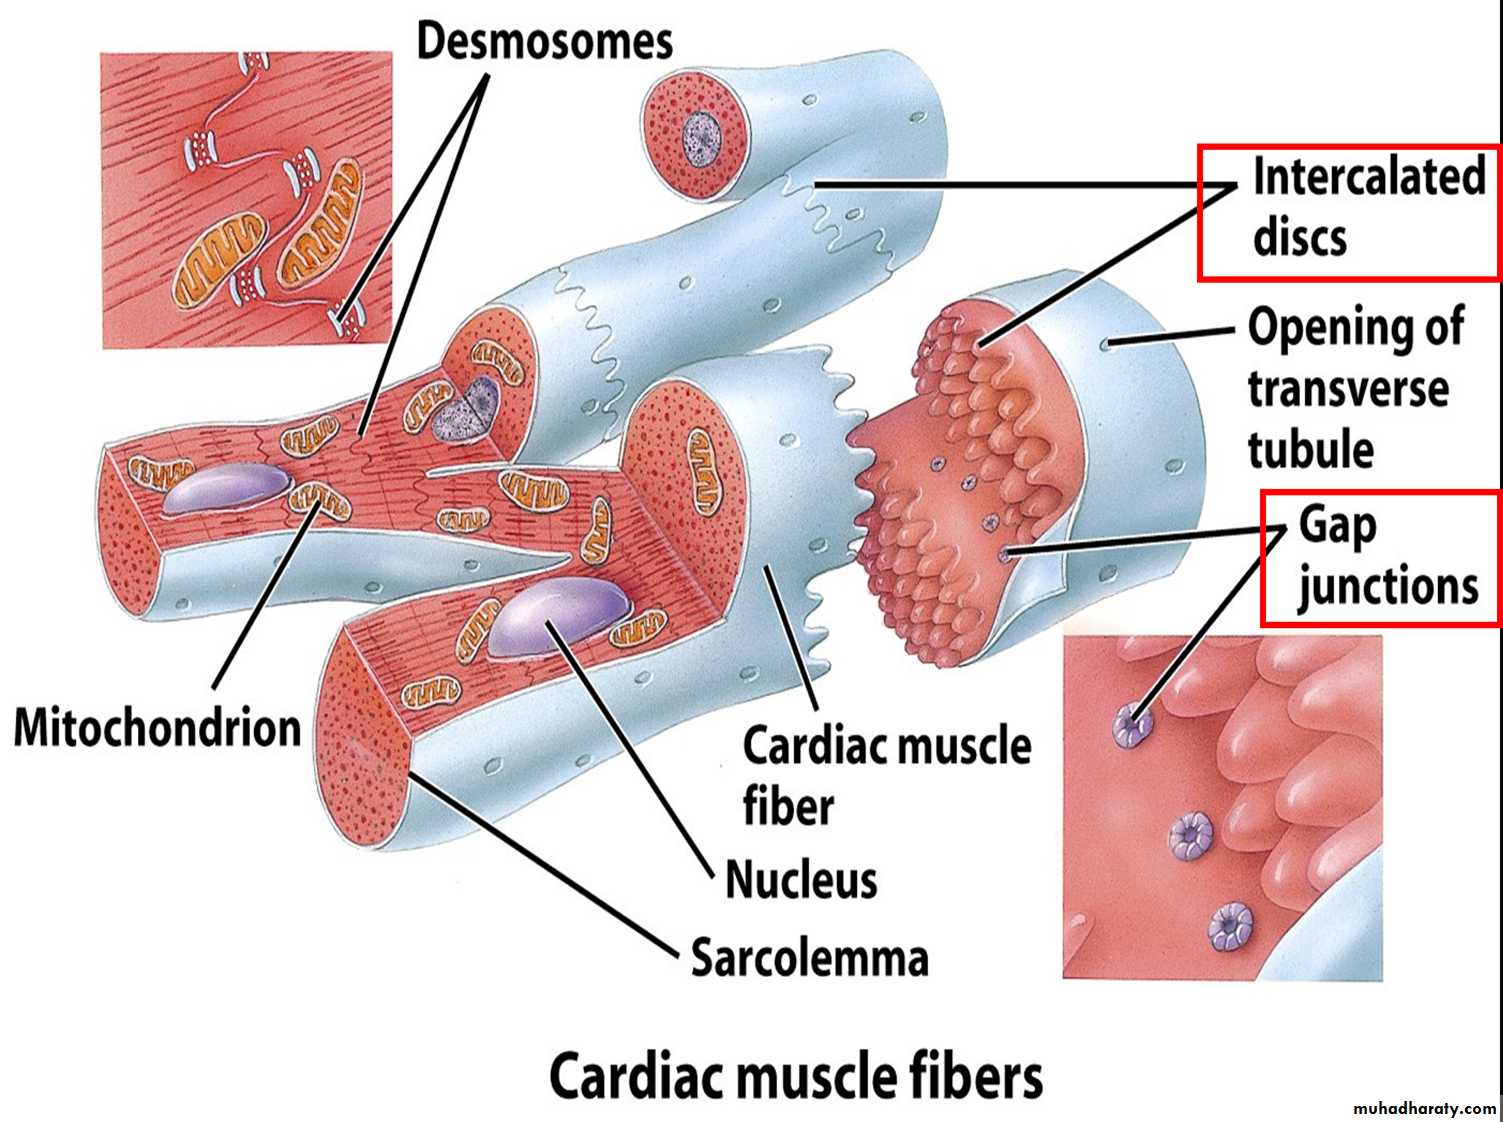 Muscle and Nerve tissues pptx - D. Talib - Muhadharaty